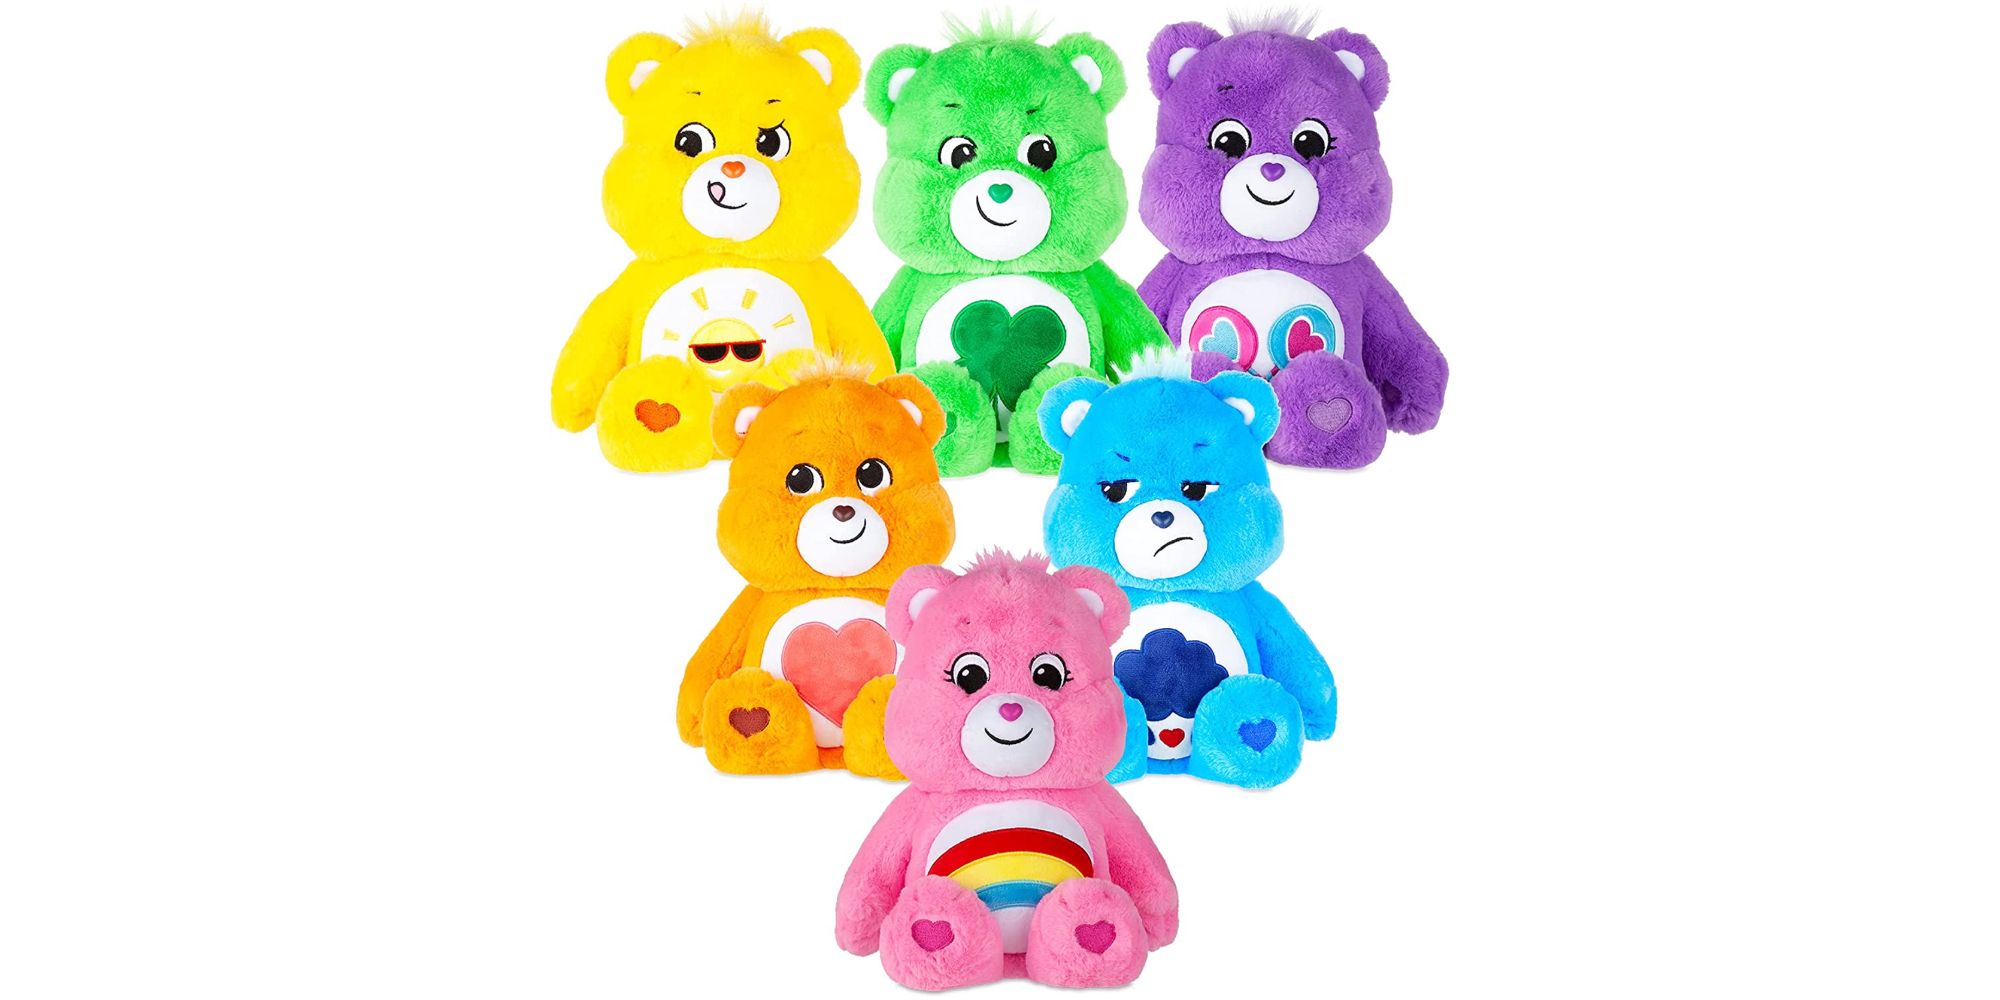 Care Bears collection from Amazon